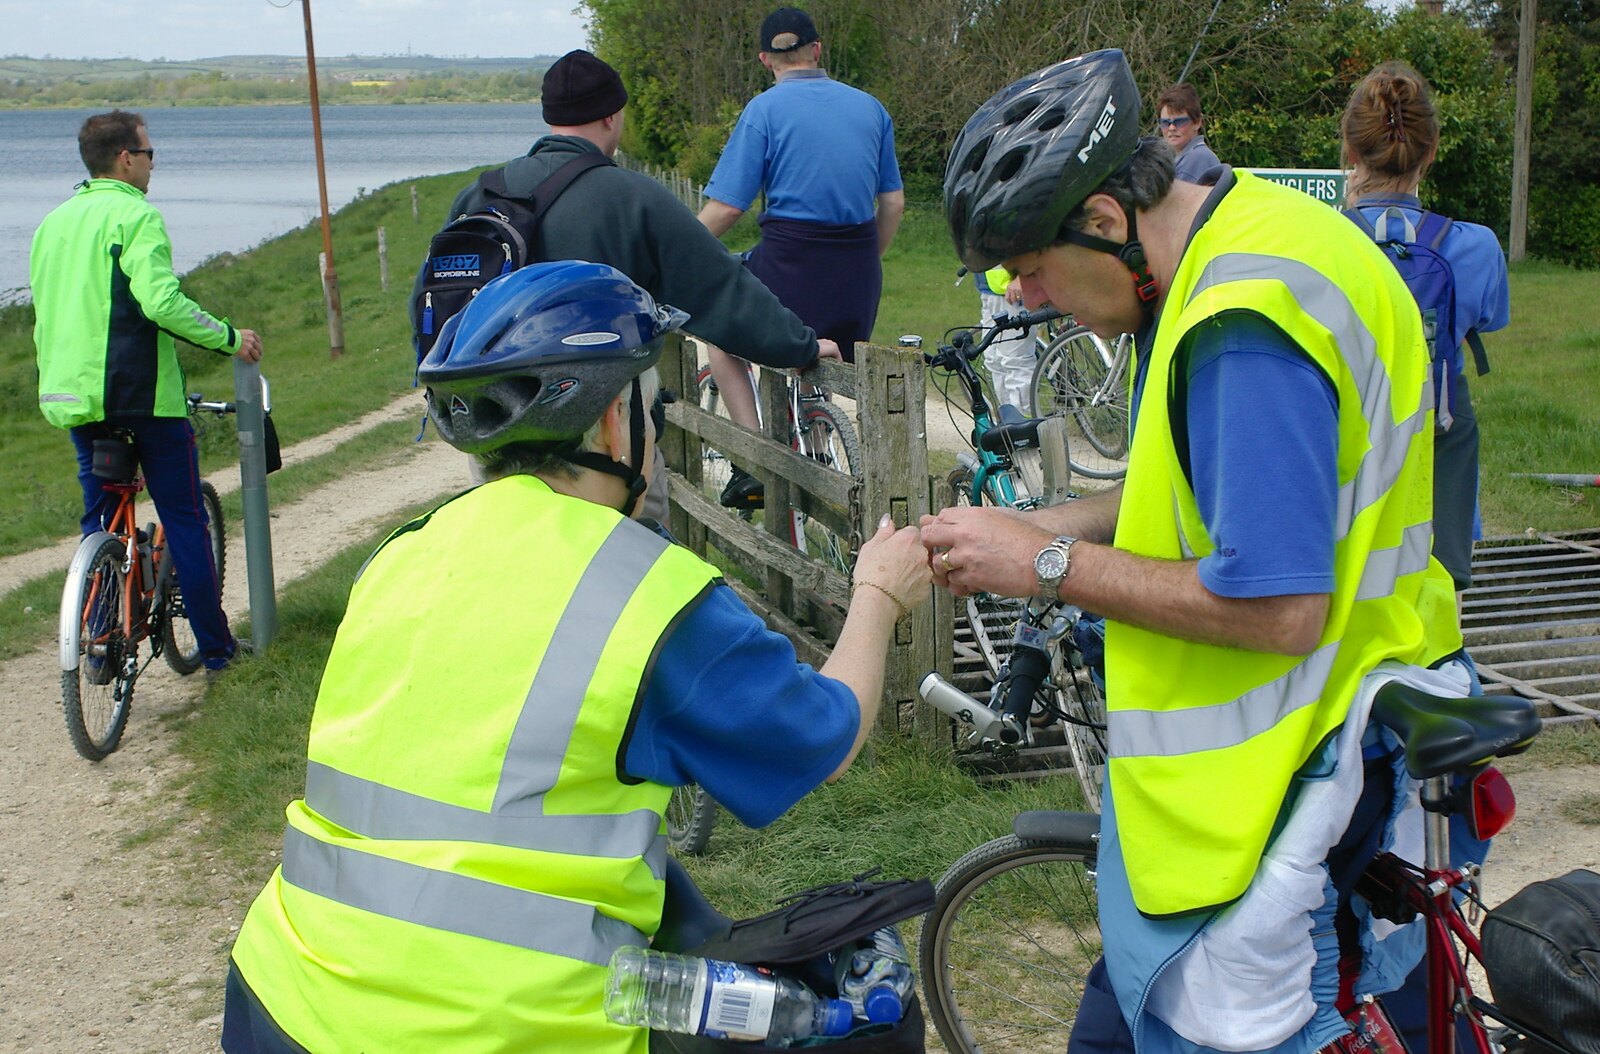 Alan helps out Spammy with some running bike repairs from The BSCC Weekend Trip to Rutland Water, Empingham, Rutland - 14th May 2005